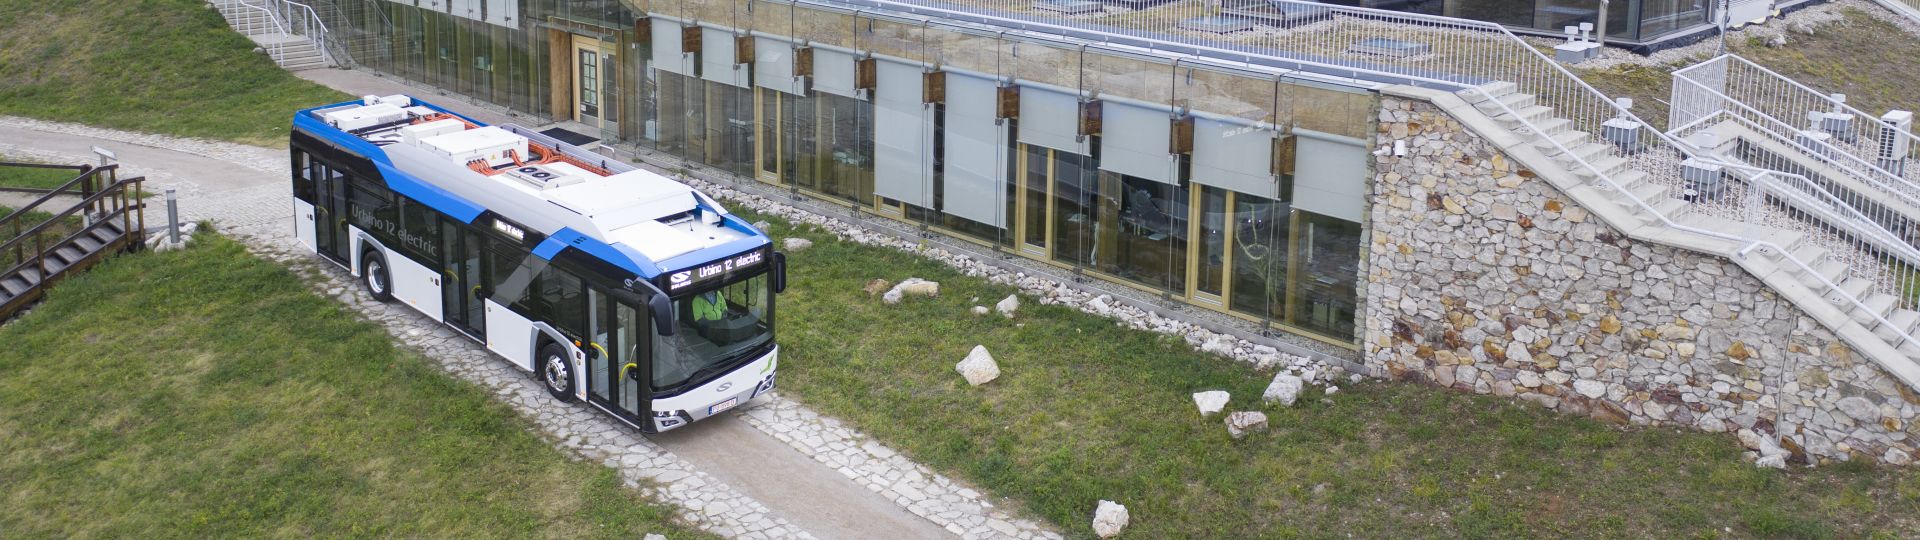 Electric Solarises in yet another Polish city. Włocławek commissions emission-free buses